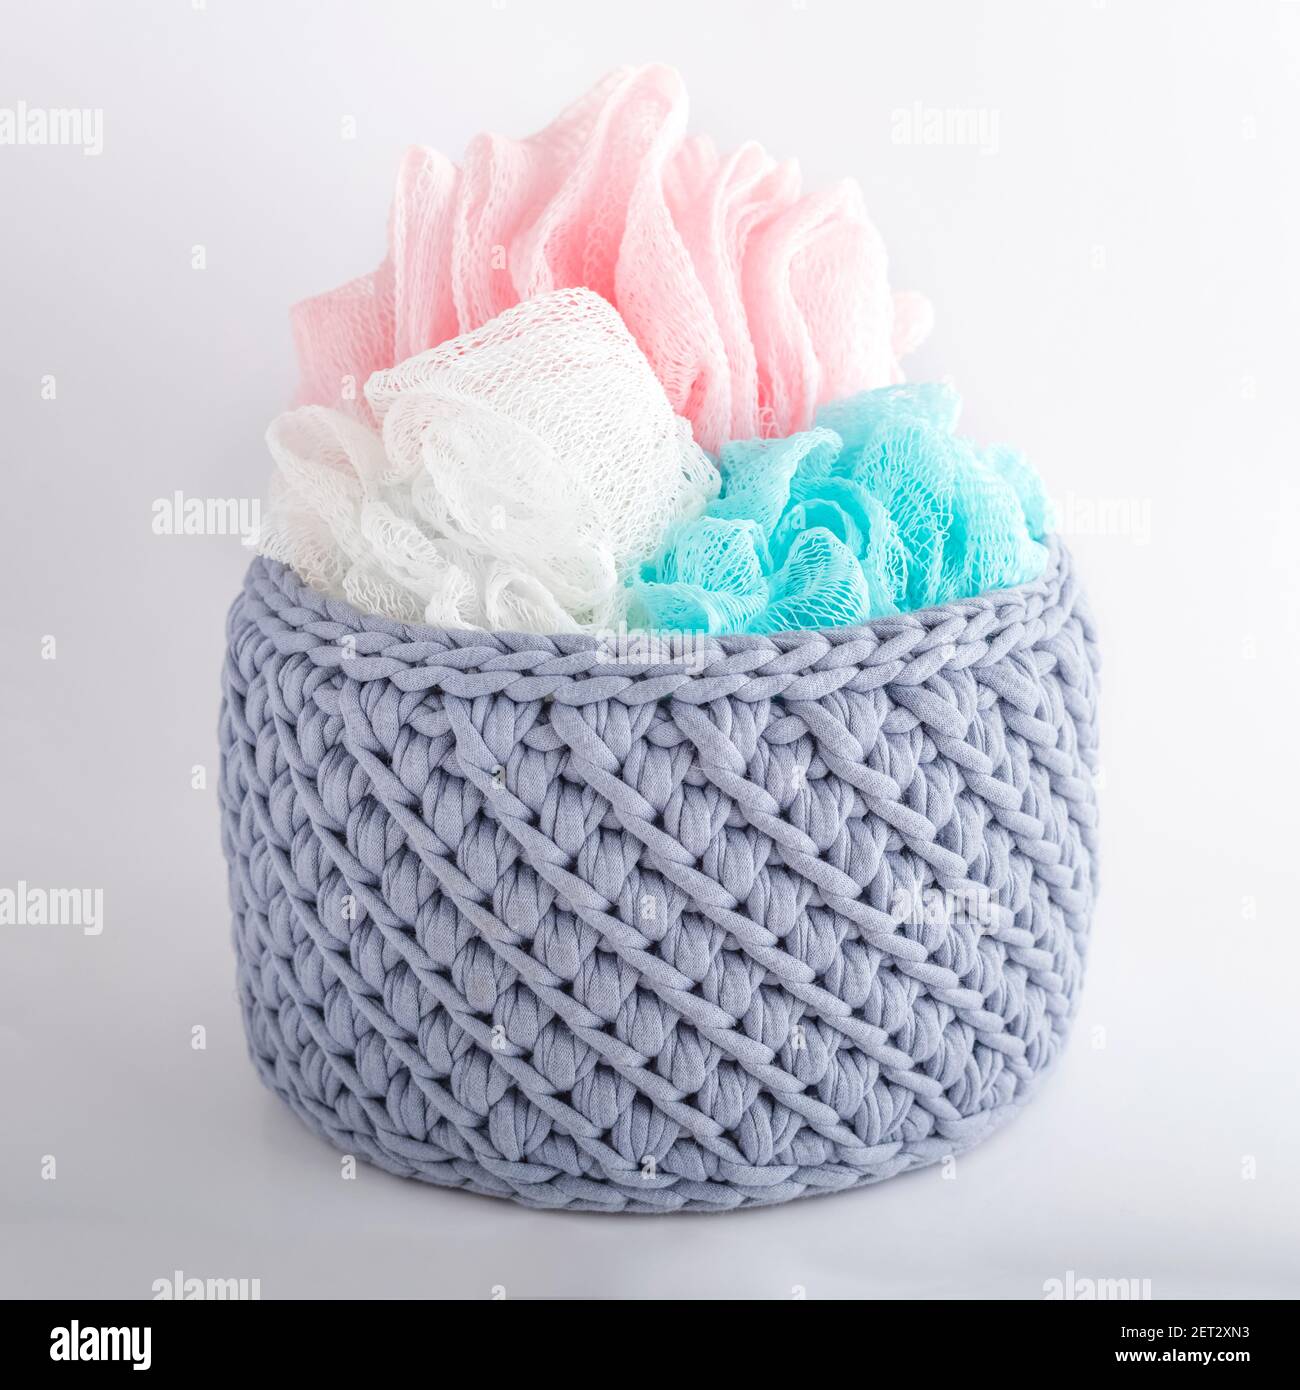 gray handmade basket with colored washcloths. texture of knitted fabric braids Stock Photo